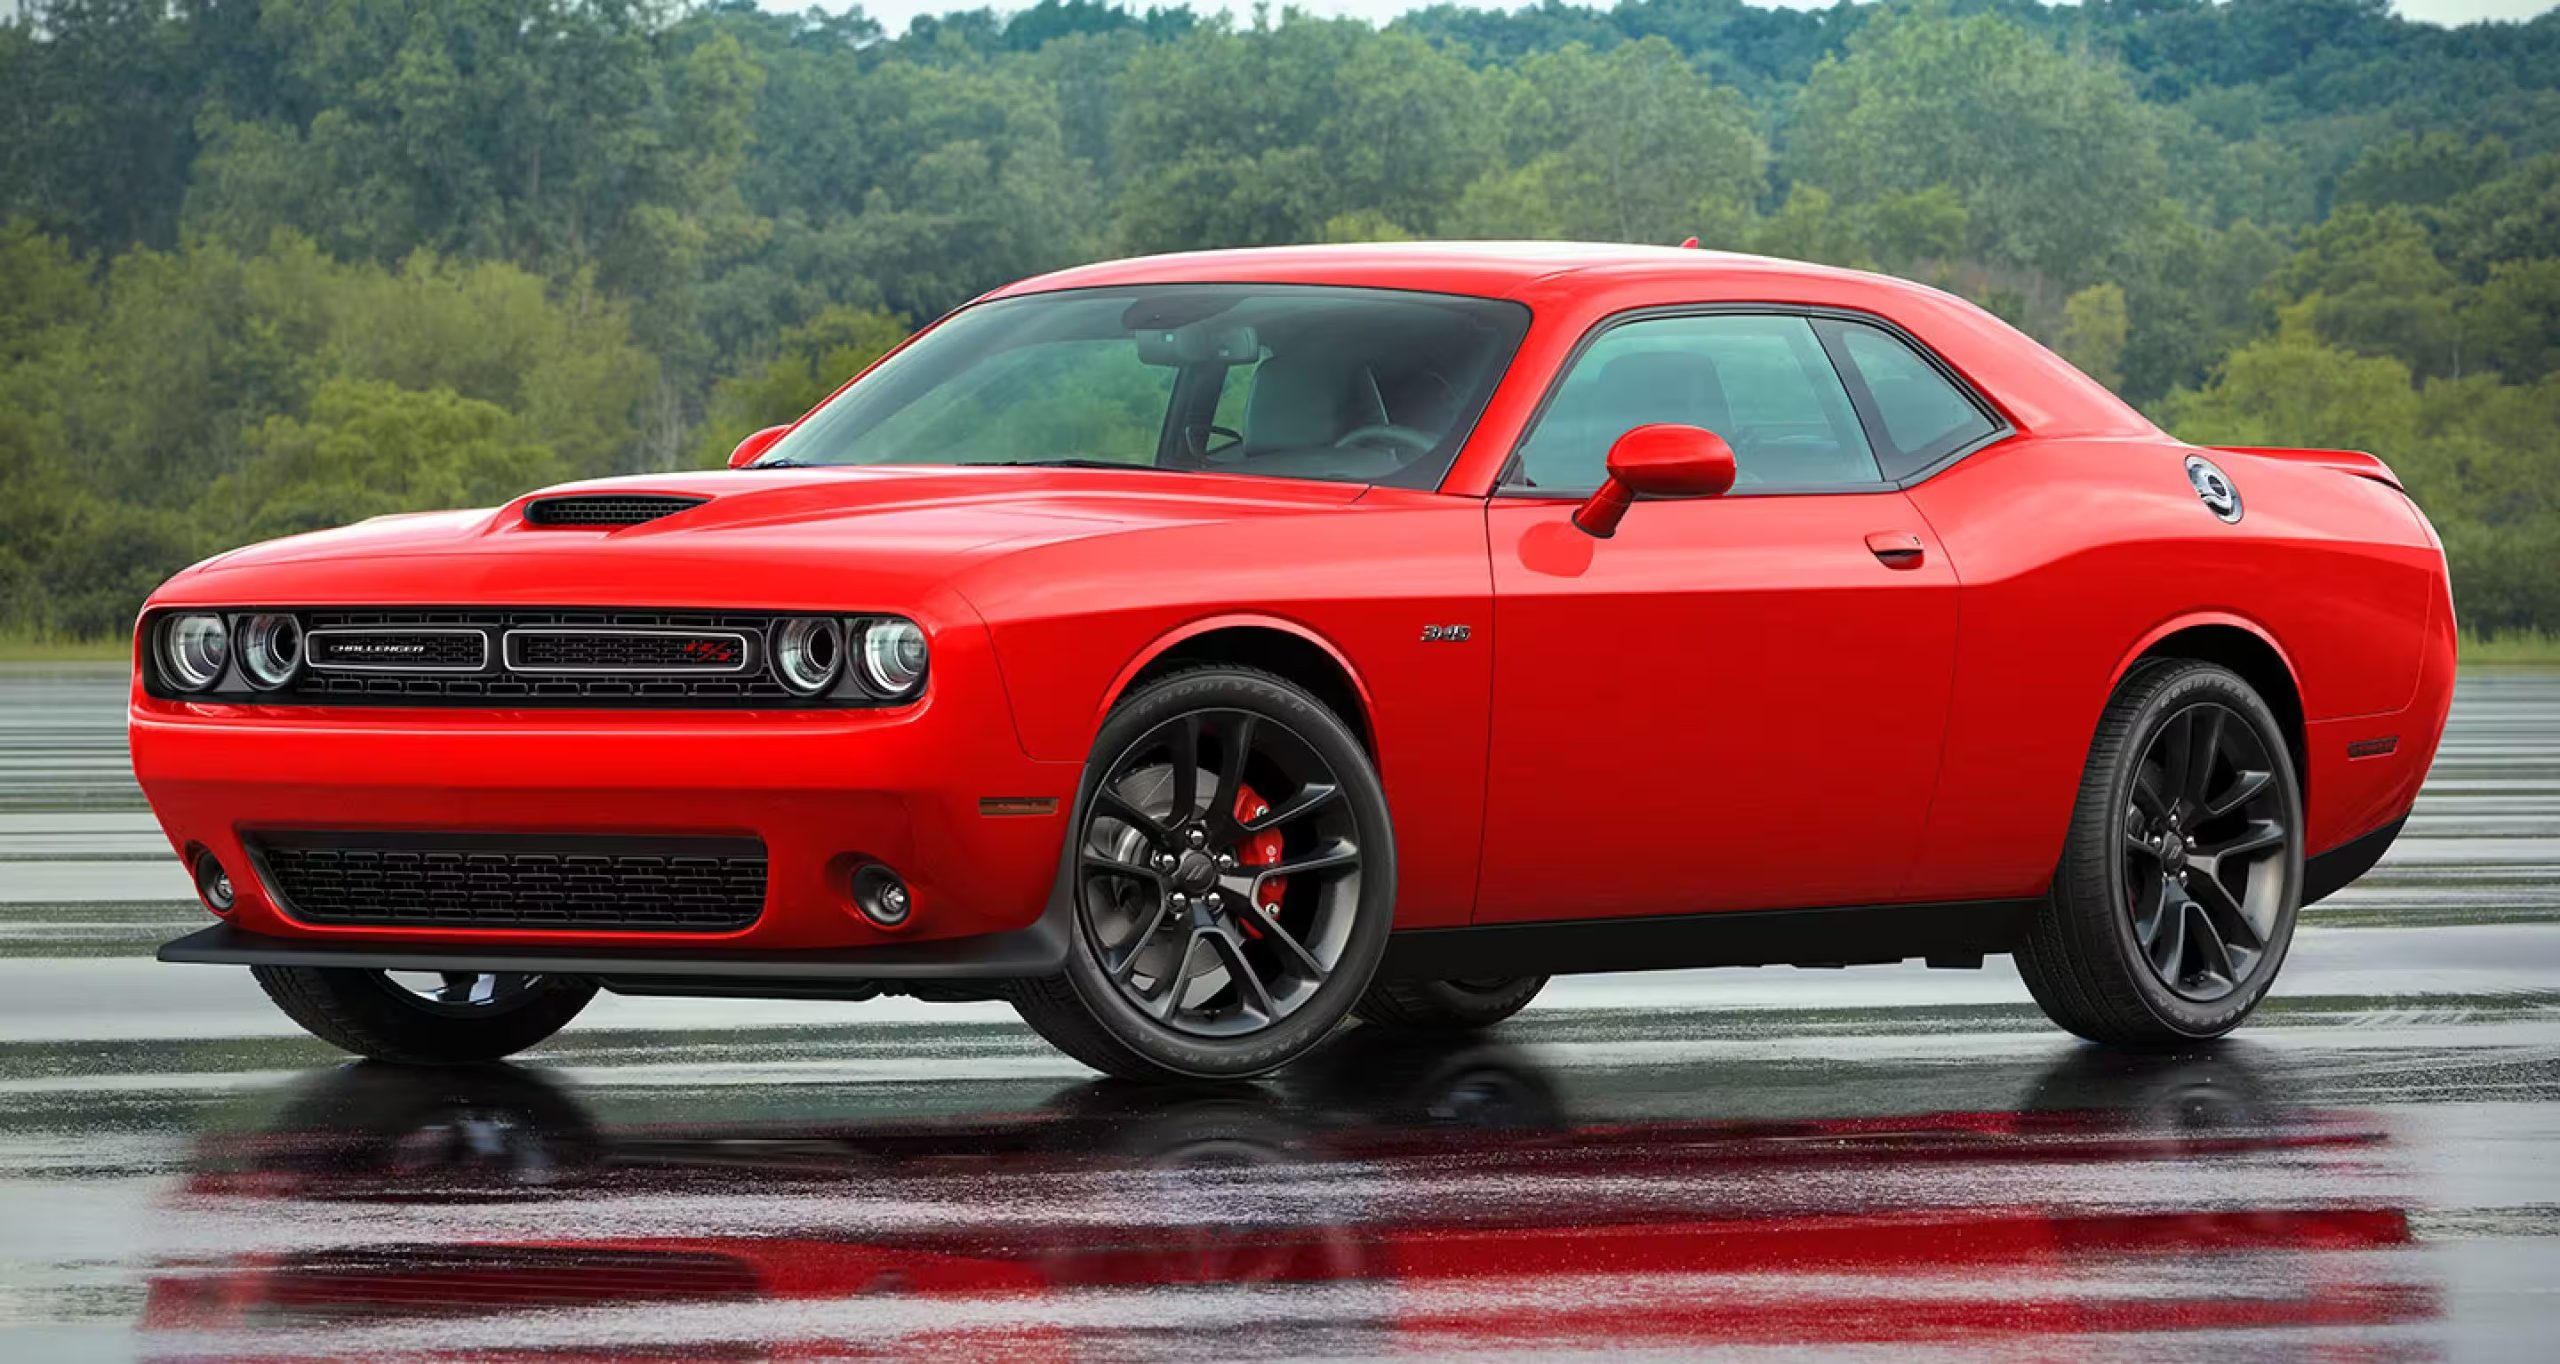 The Future of the Challenger Following the Introduction of Coupe and Sedan Variants of the Charger